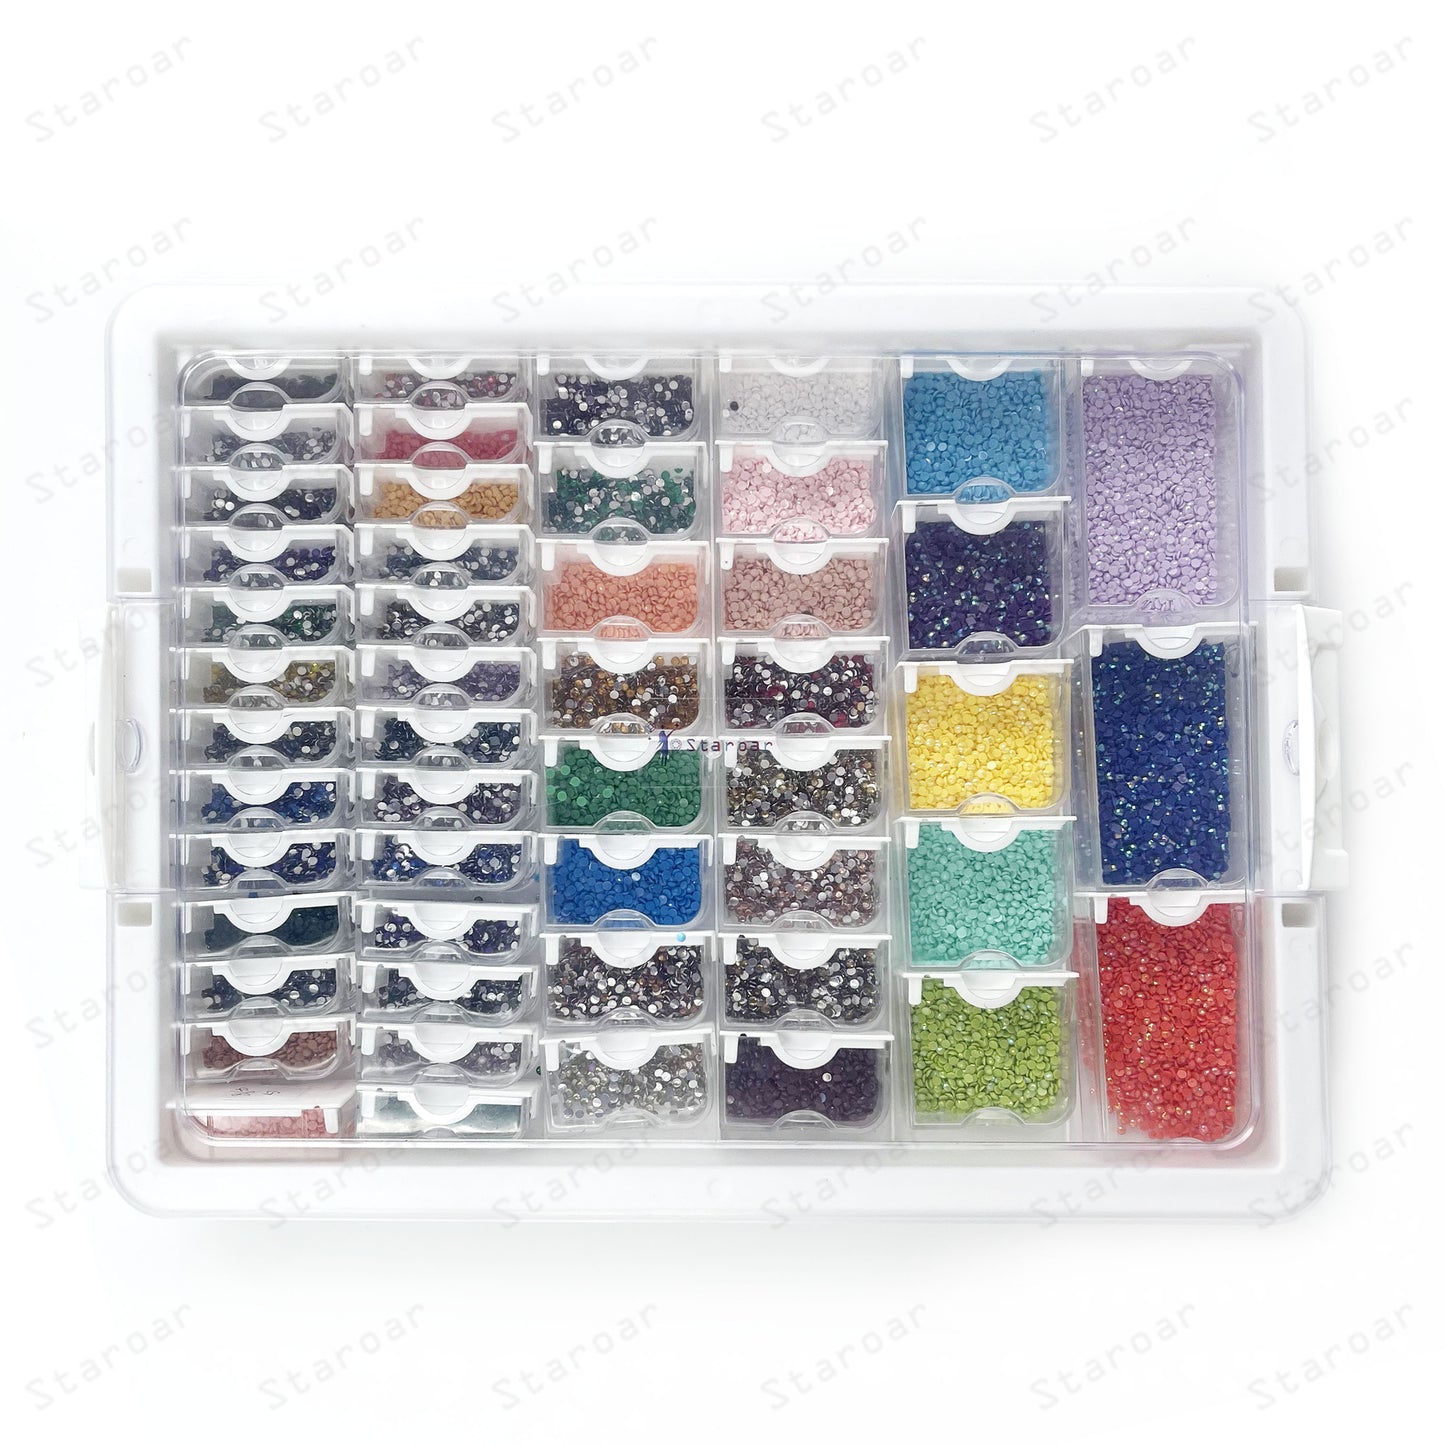 Bead Organizer with Tiny Containers – Staroar